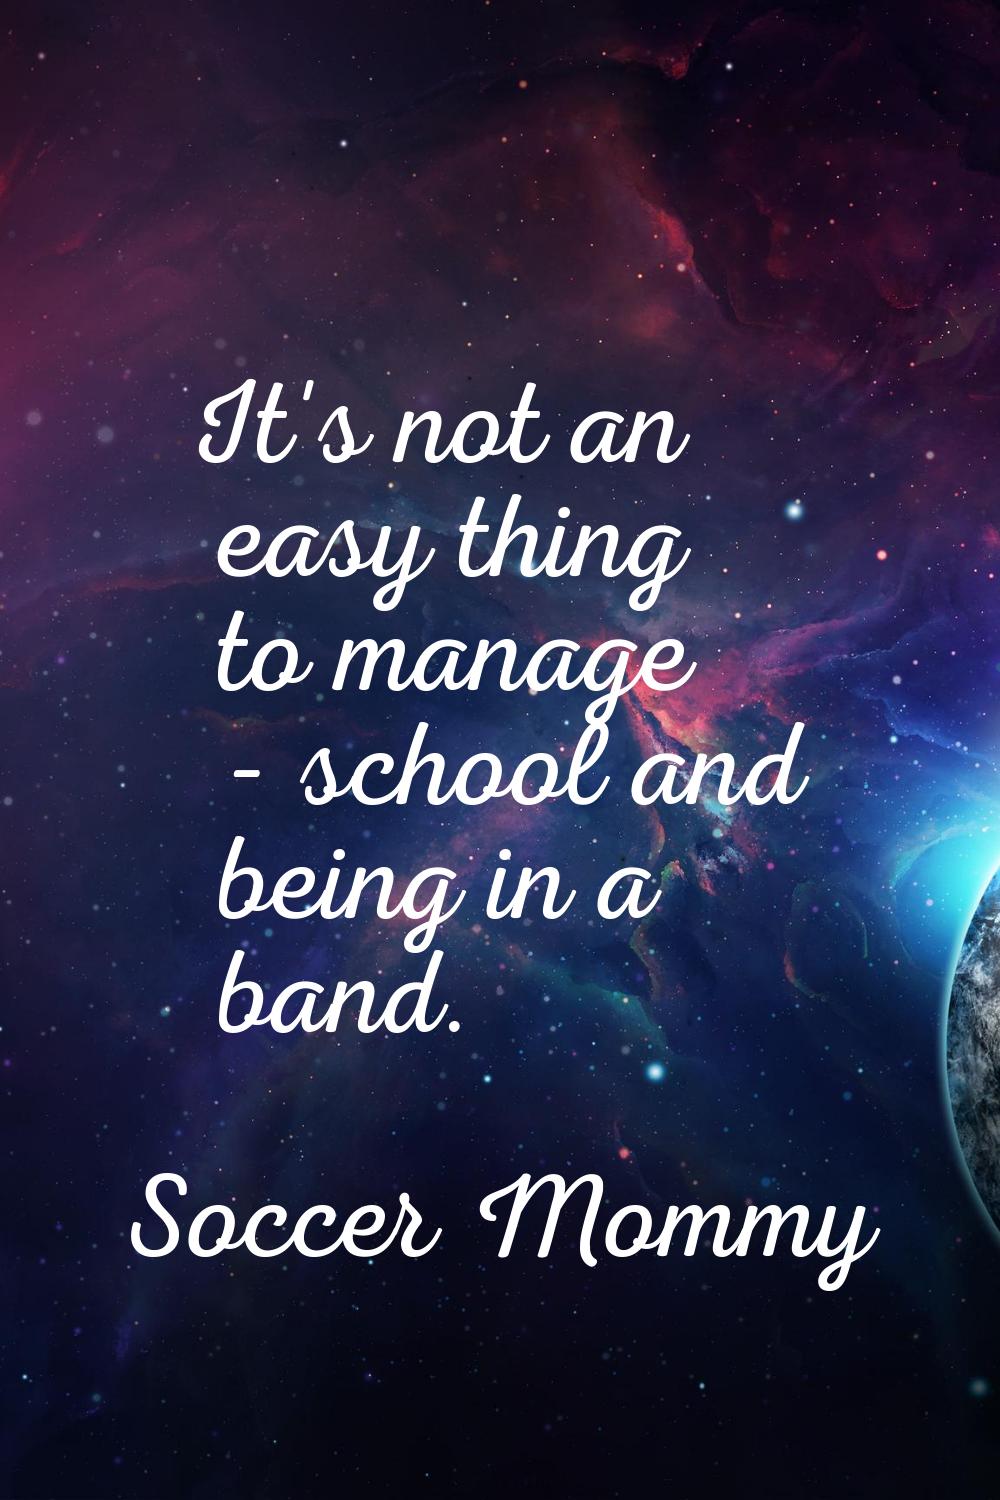 It's not an easy thing to manage - school and being in a band.